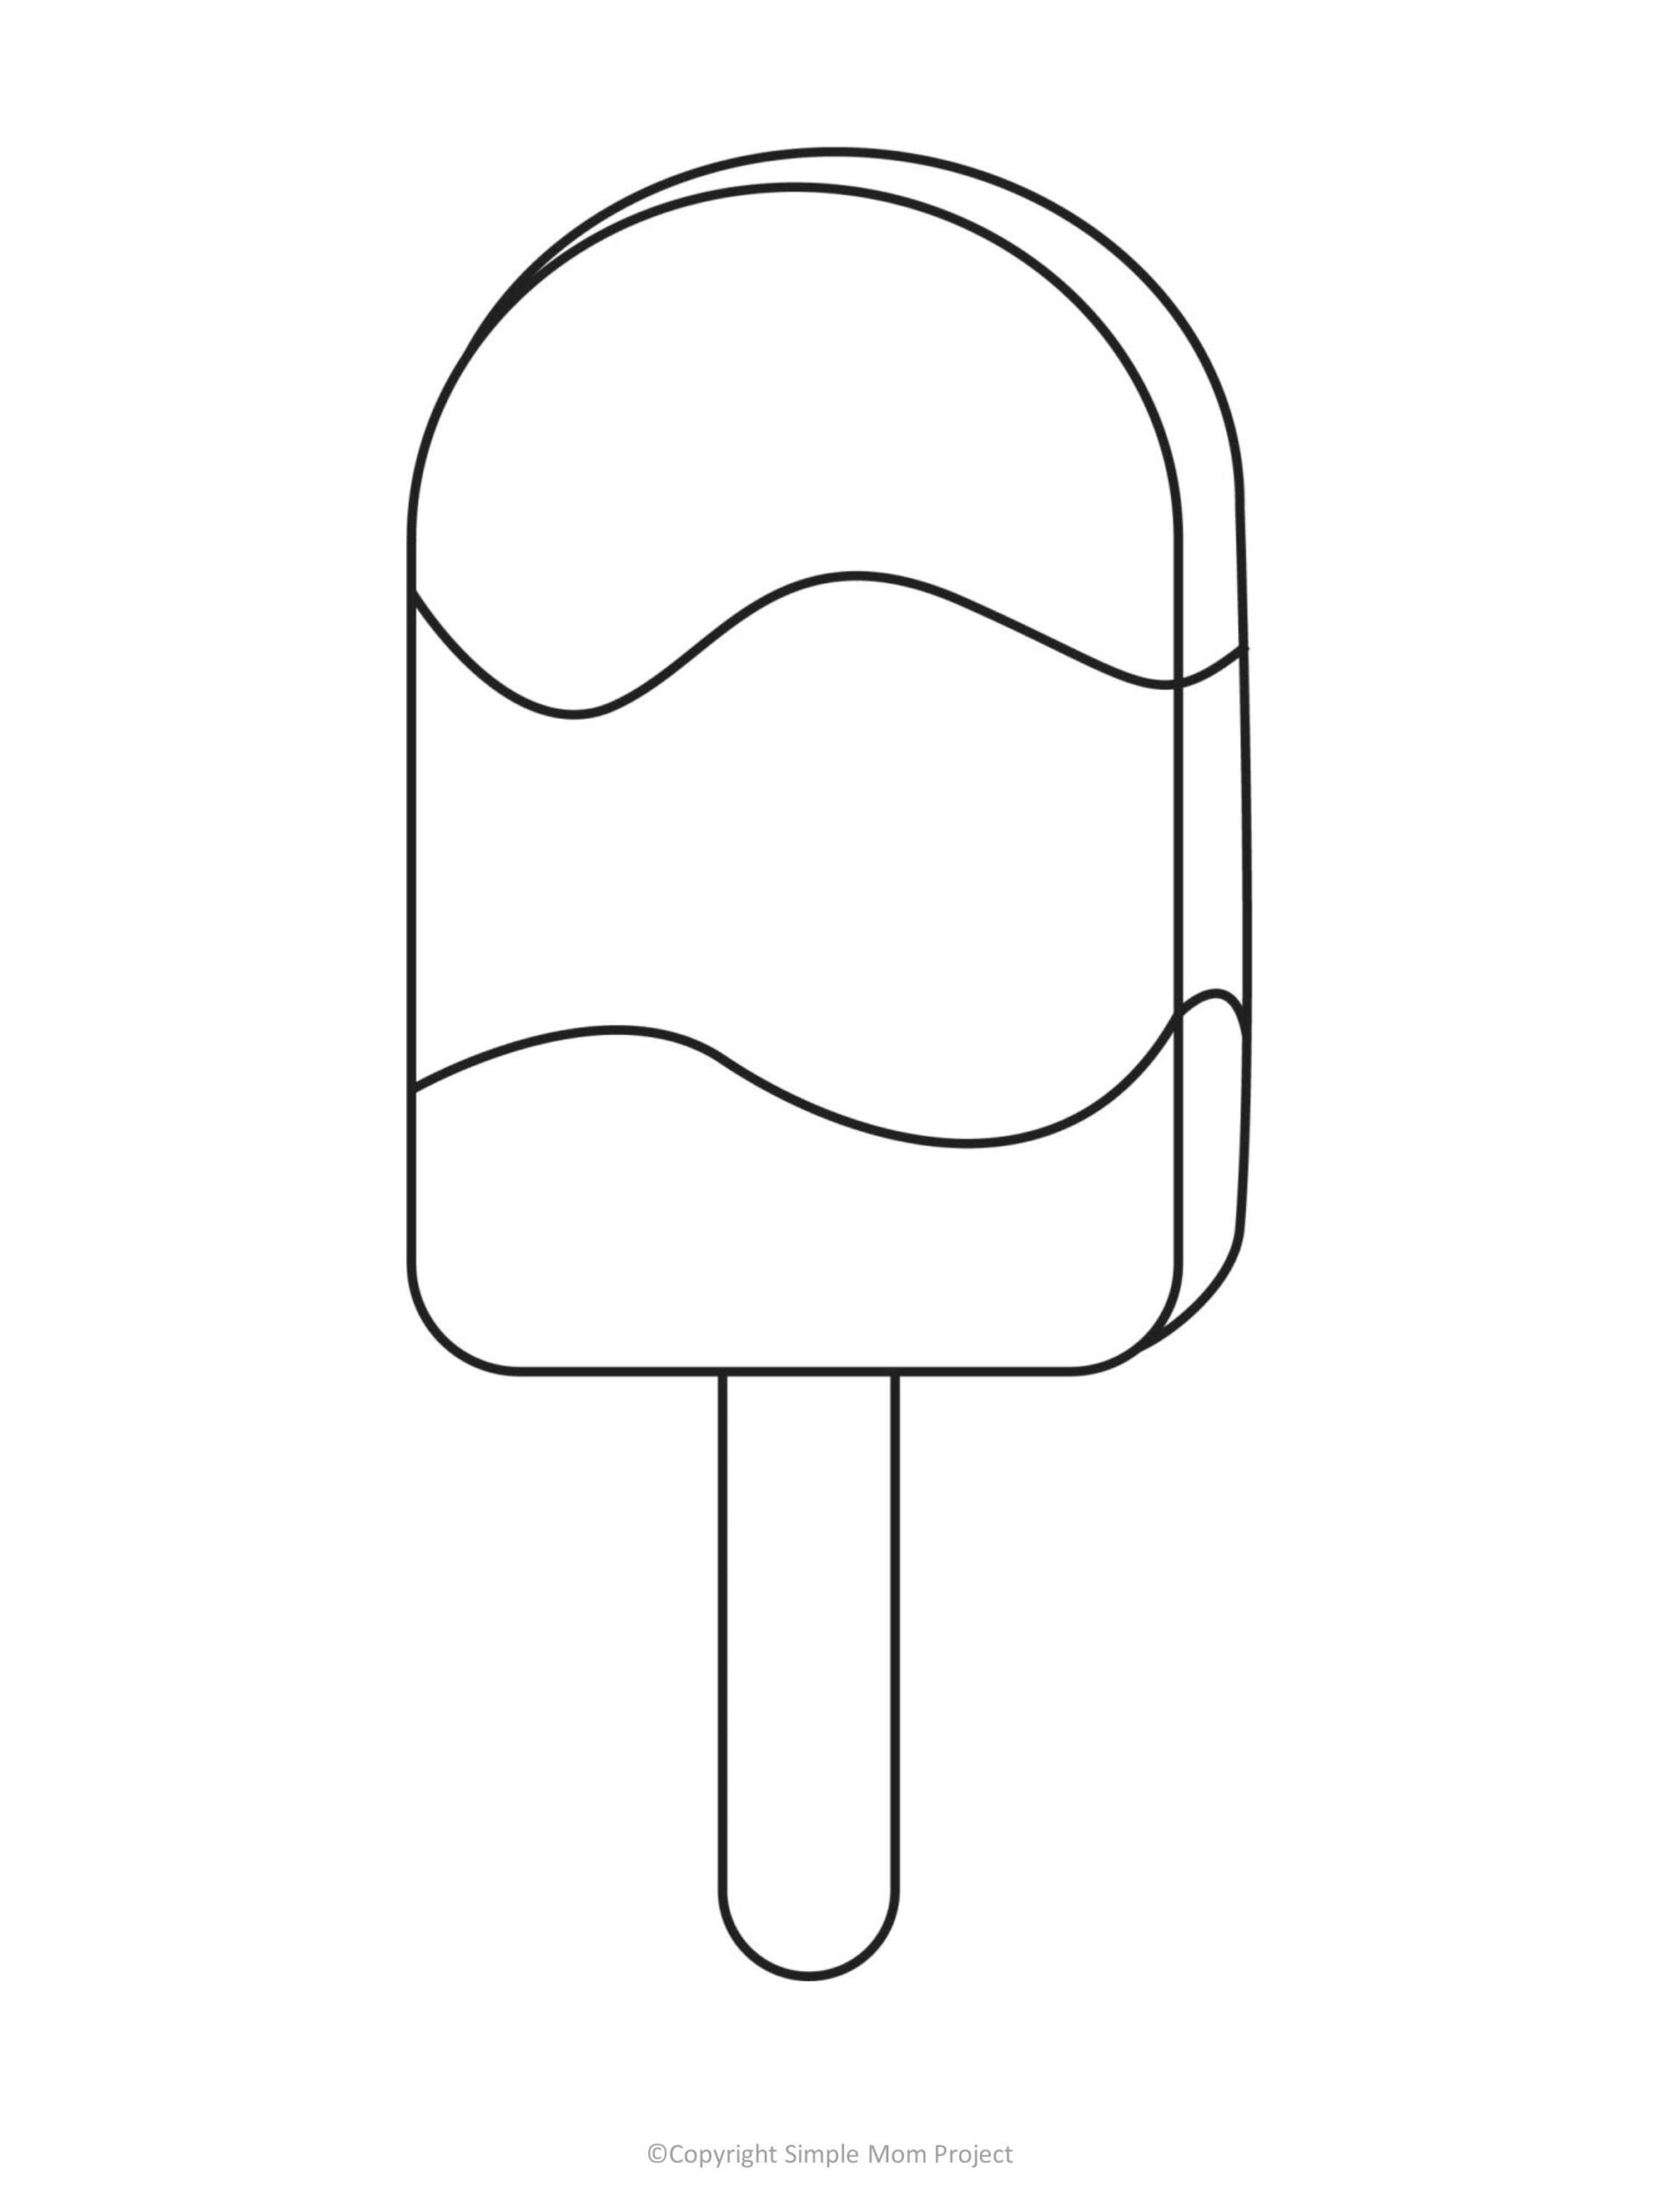 Free Printable Popsicle Template | Popsicle Crafts, Popsicle Stick for Free Printable Popsicle Template